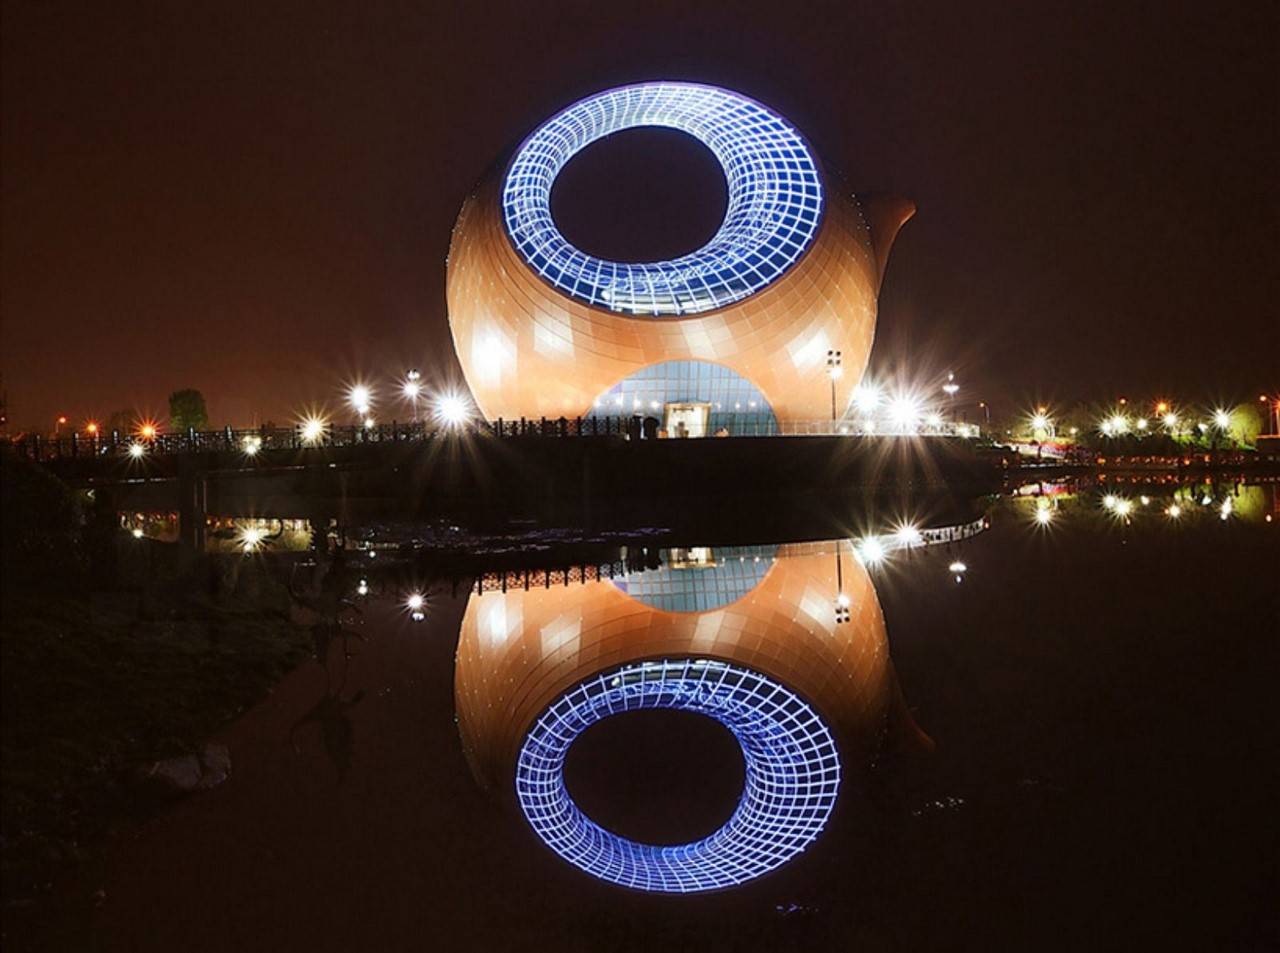 Exhibition center-kettle in Wuxi, China.